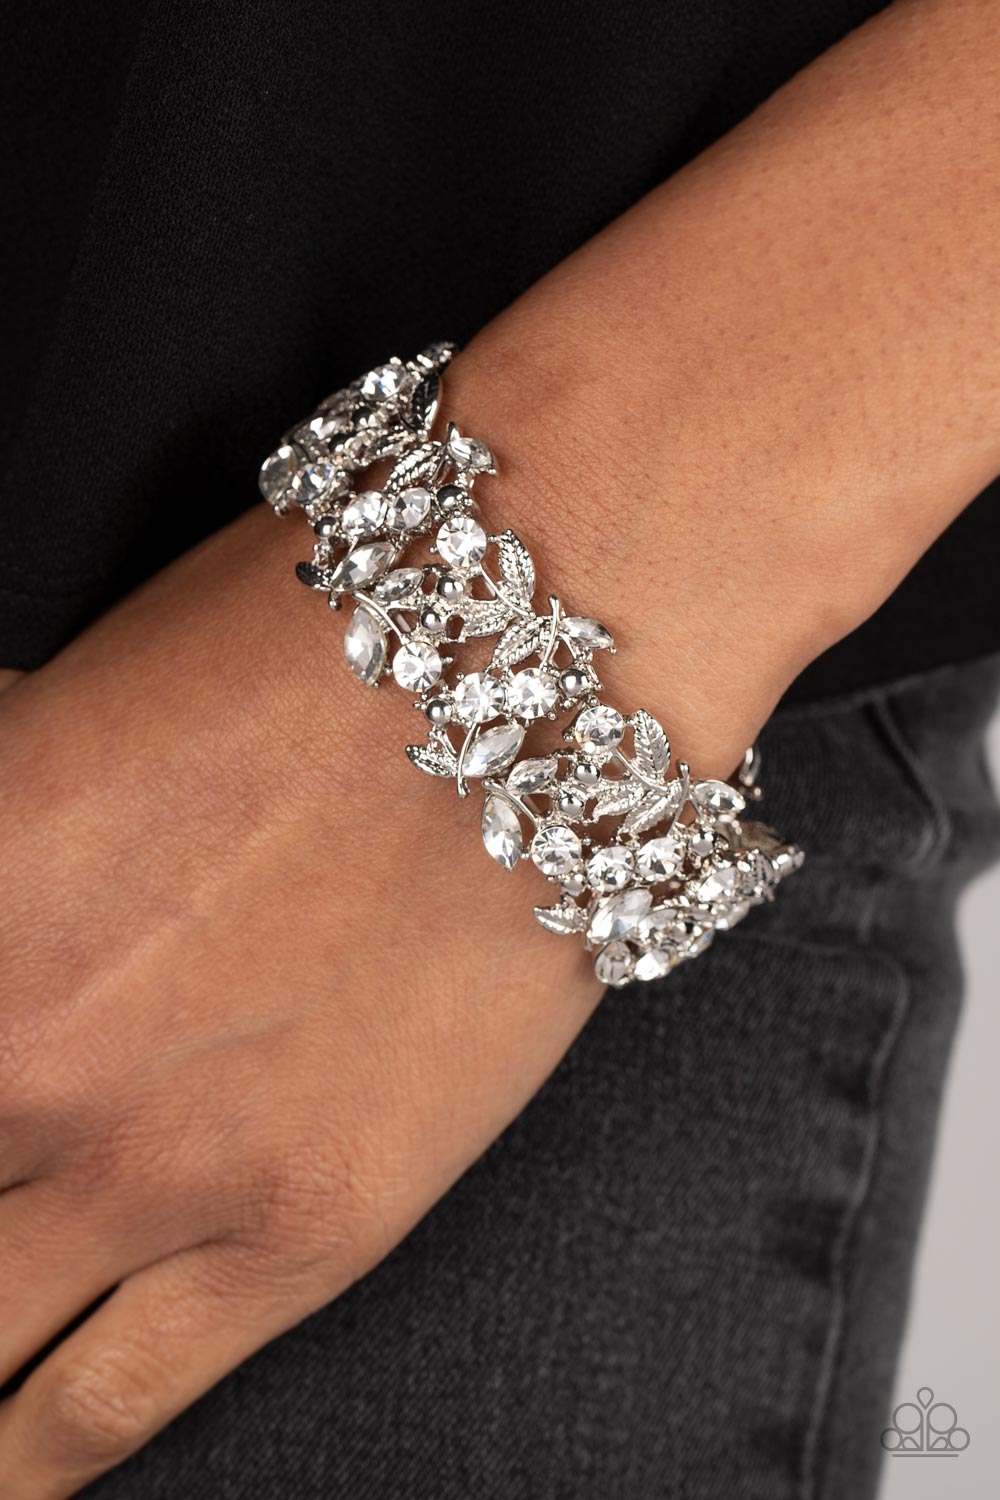 Round and marquise-cut white gems intertwine around polished silver studs and ornate feather-like details in a glitzy pattern. The textured, glittery display is threaded along elastic stretchy bands for a whimsical finish.  Sold as one individual bracelet.